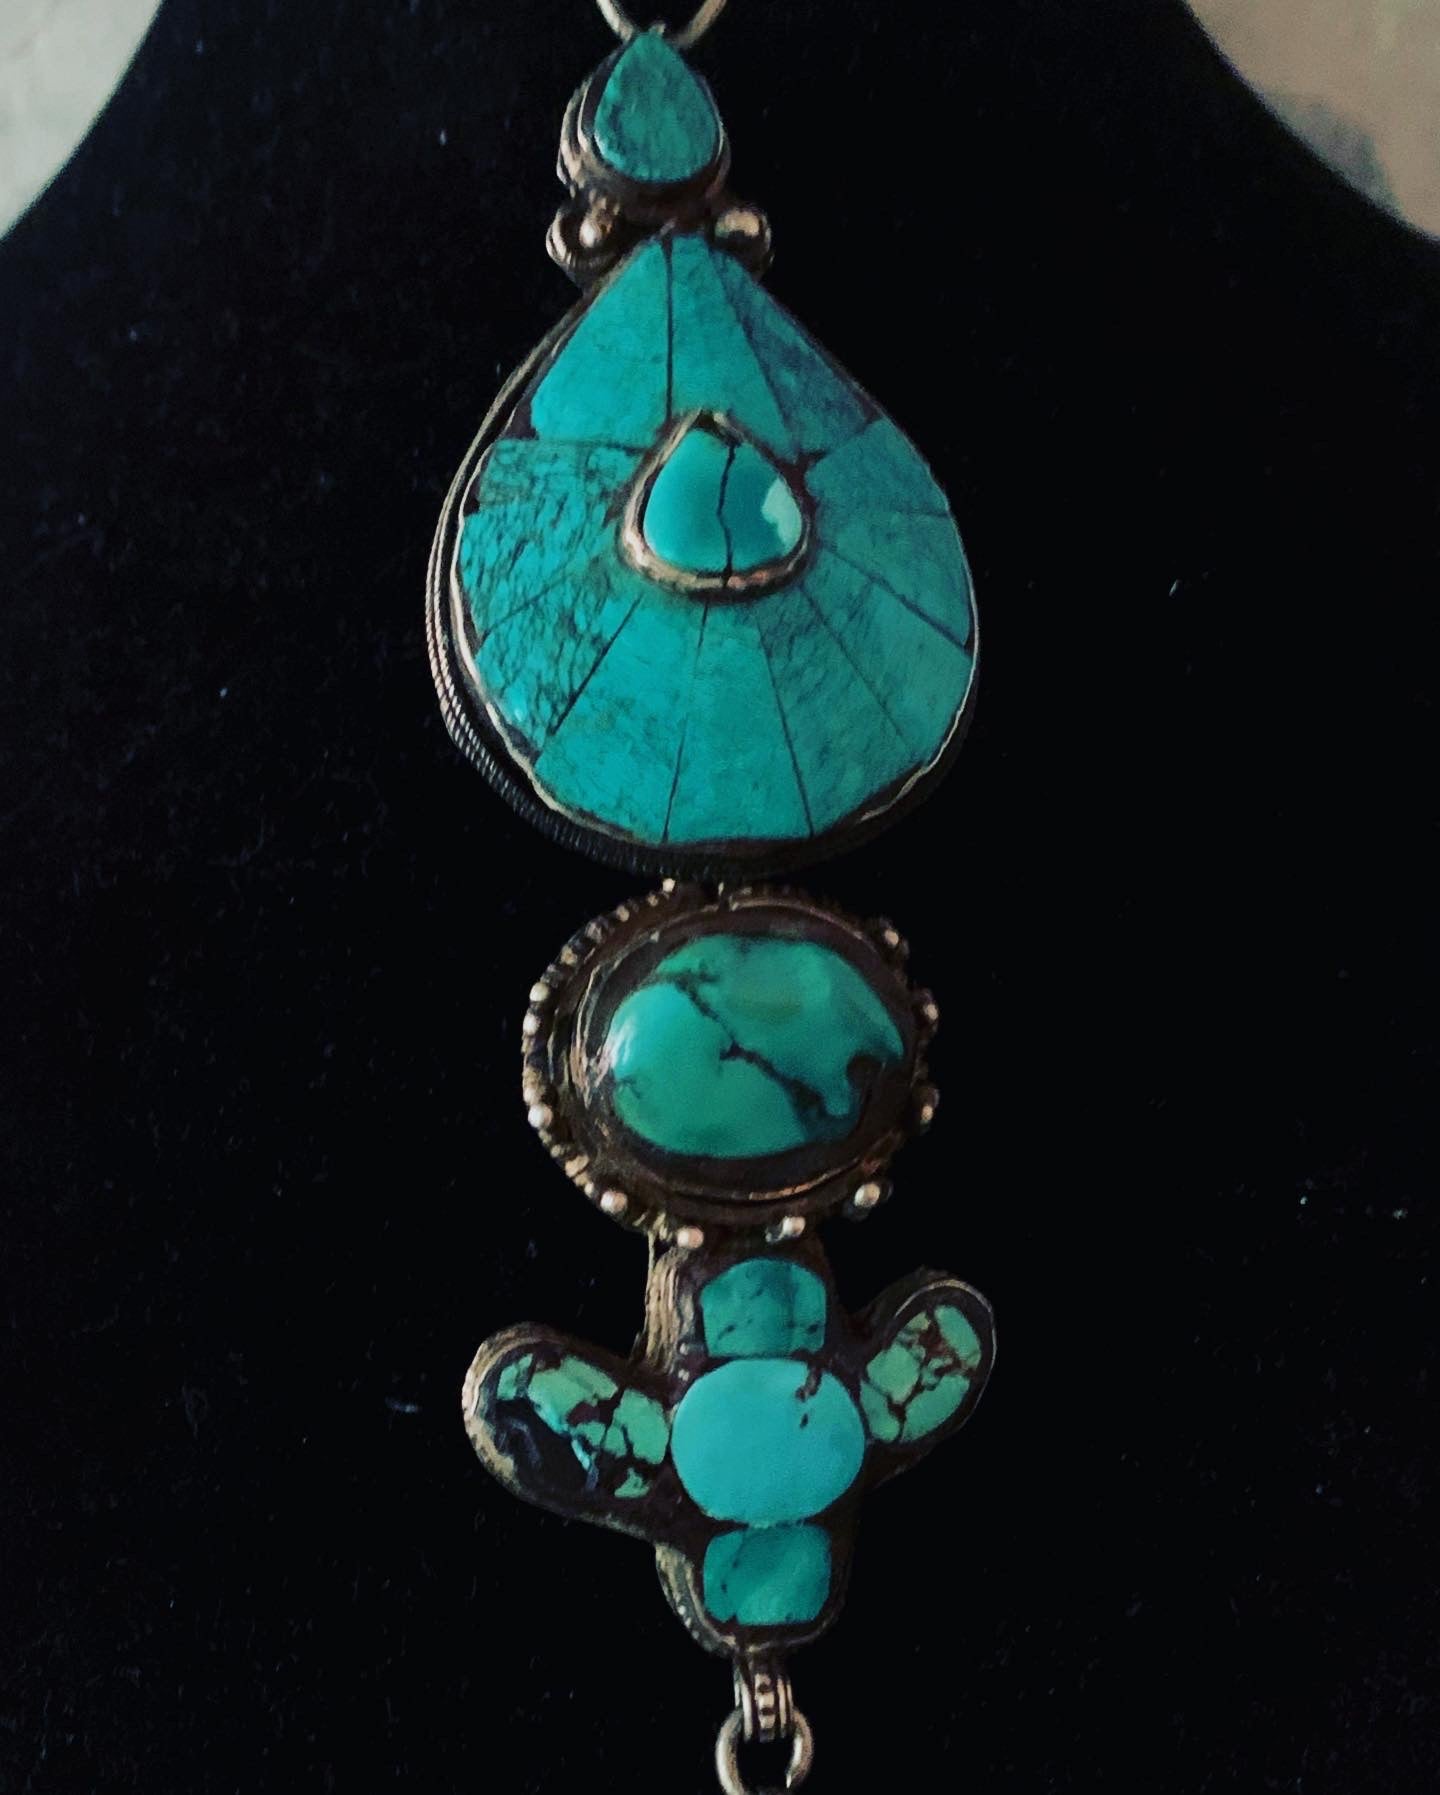 An antique turquoise and silver Tibetan ear pendant / earring